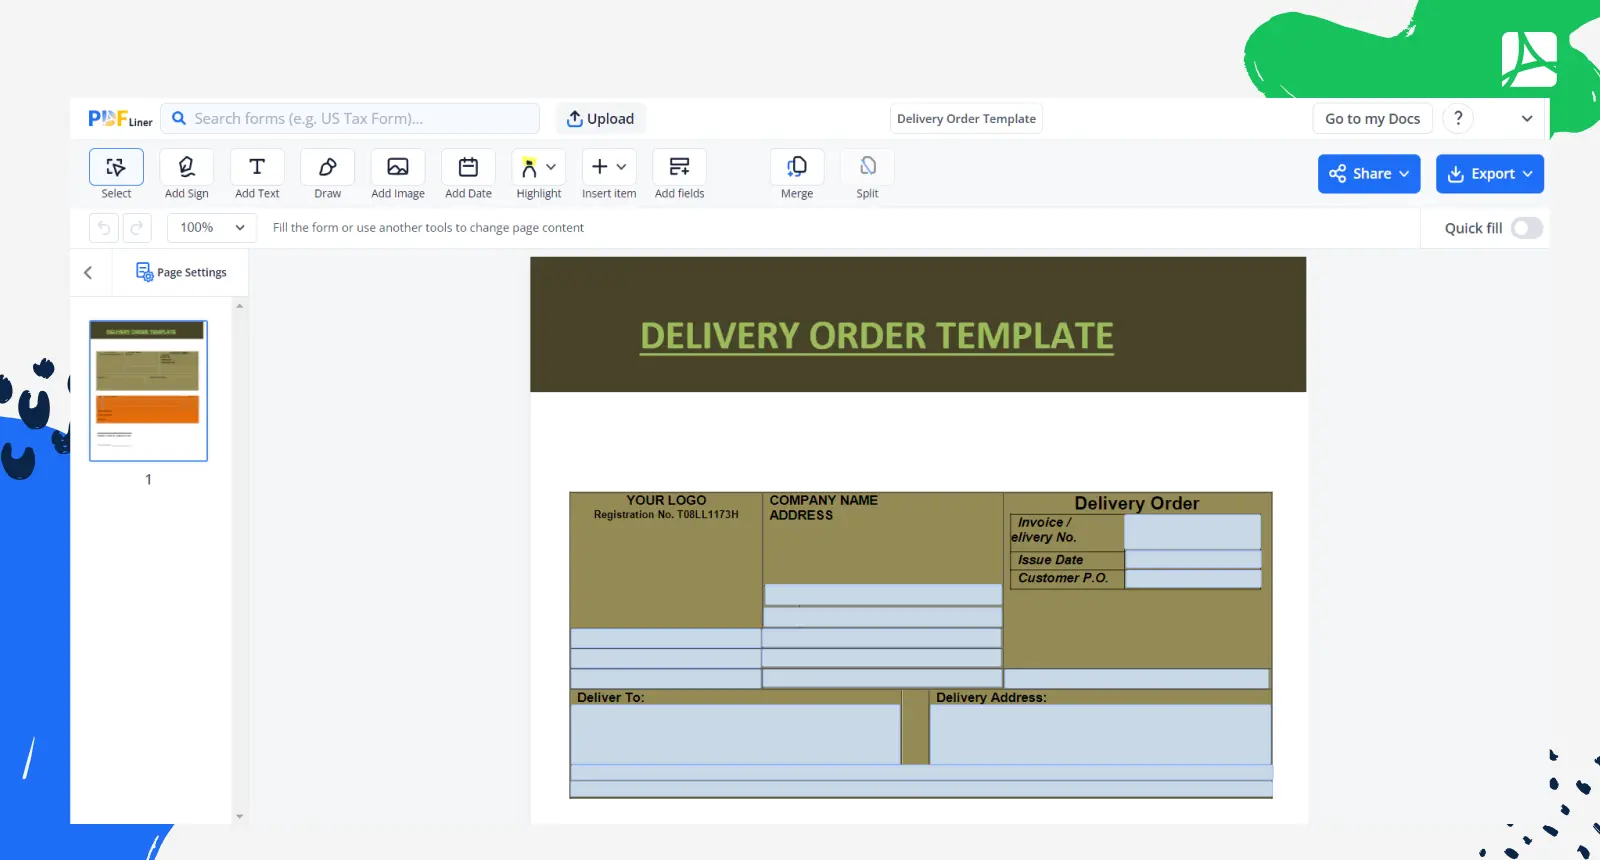 Delivery Order Template Screenshot 1